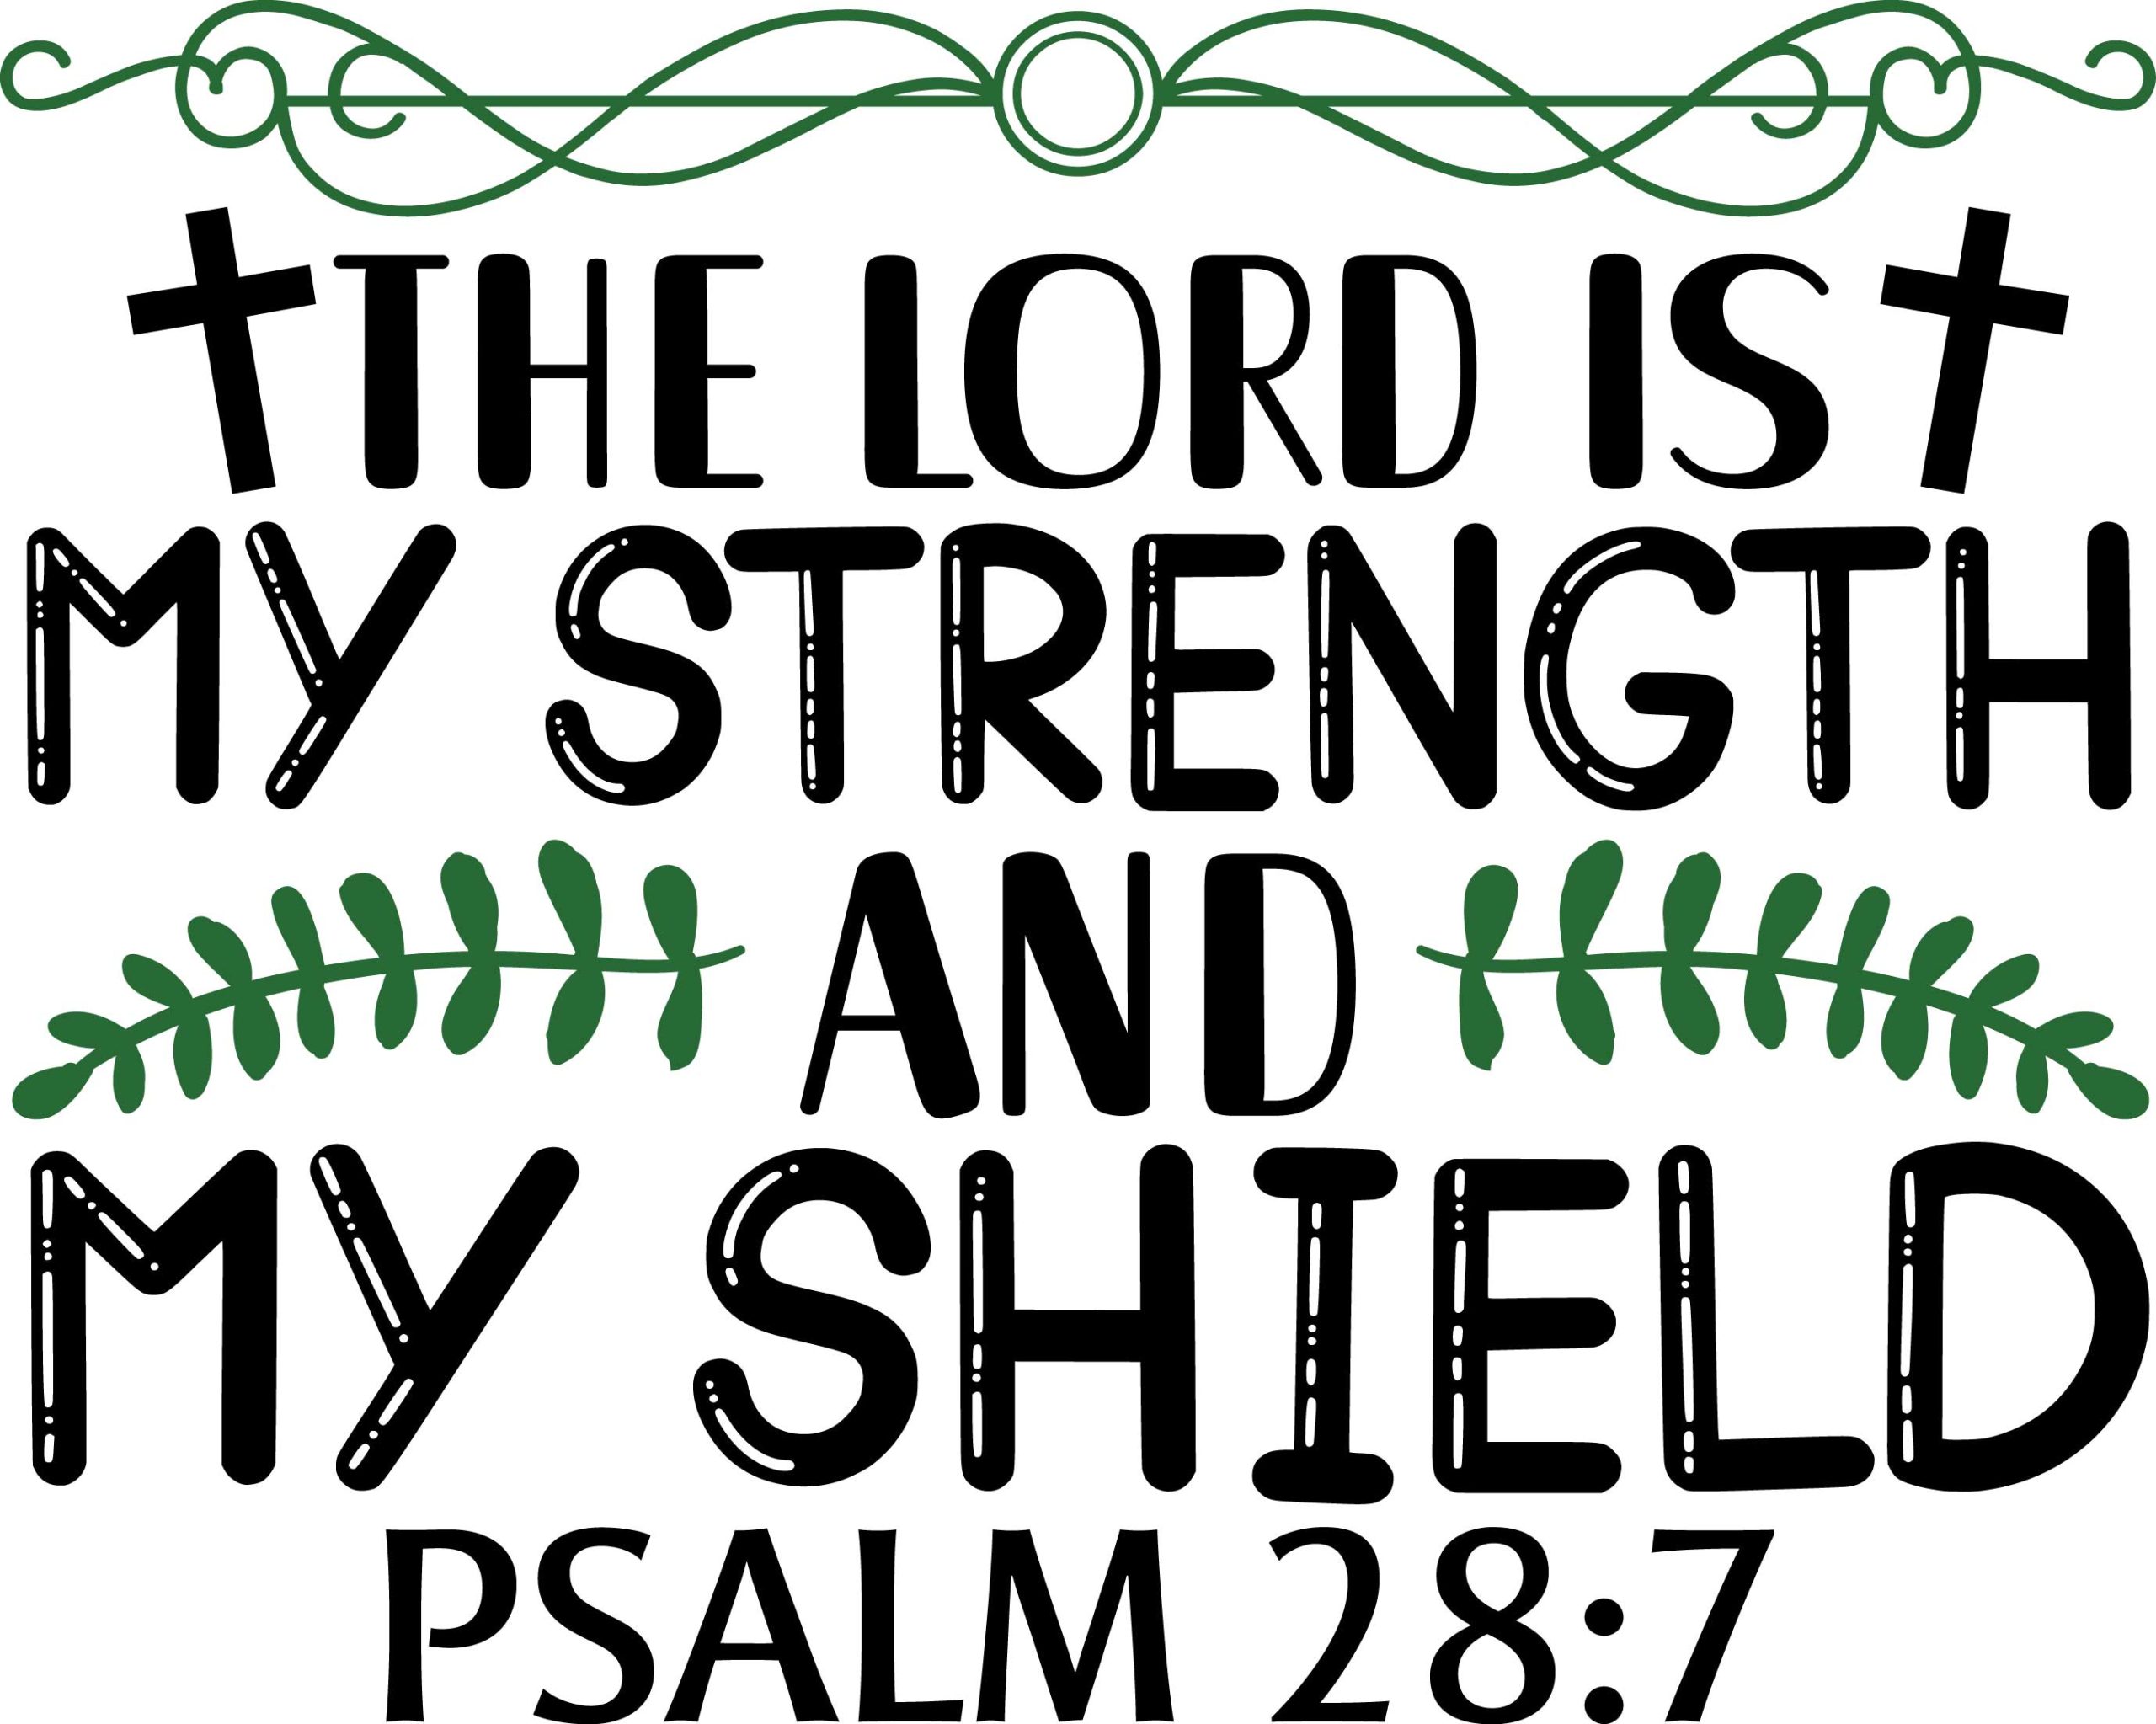 The lord is my strength and my shield Psalm 28:7, bible verses, scripture verses, svg files, passages, sayings, cricut designs, silhouette, embroidery, bundle, free cut files, design space, vector